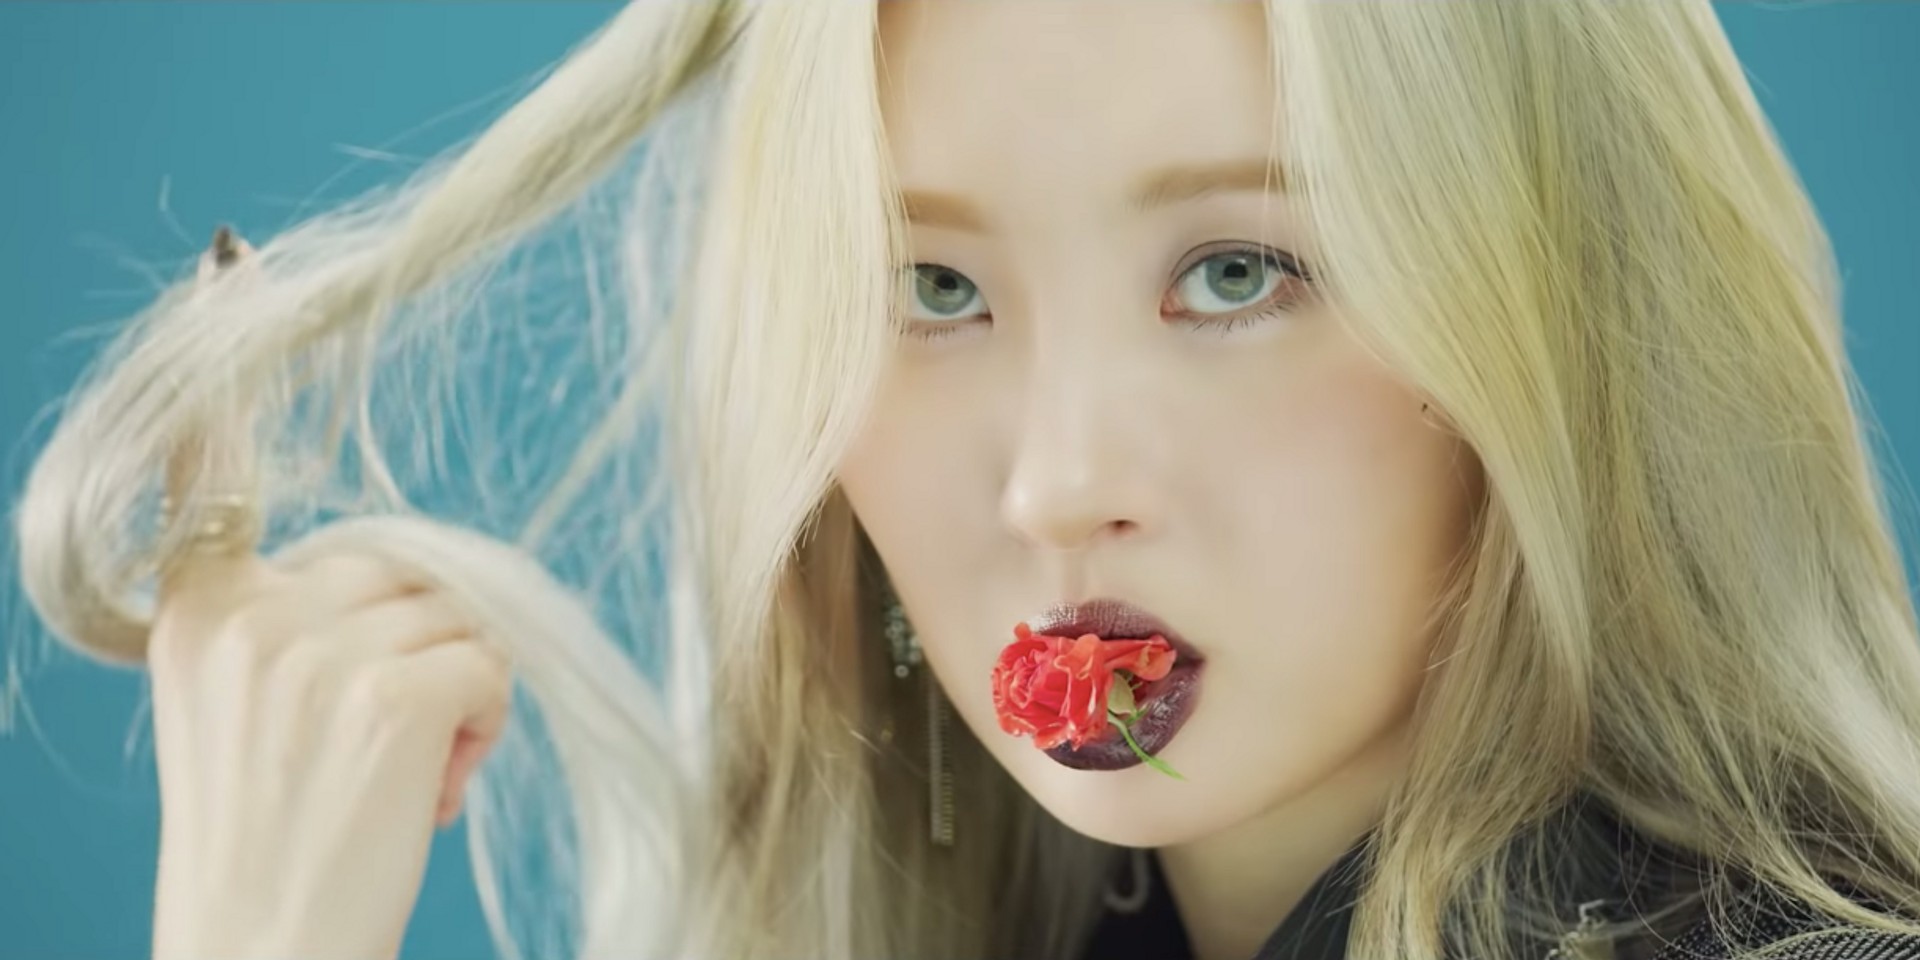 Sunmi releases striking visuals for new single, 'LALALAY' – watch